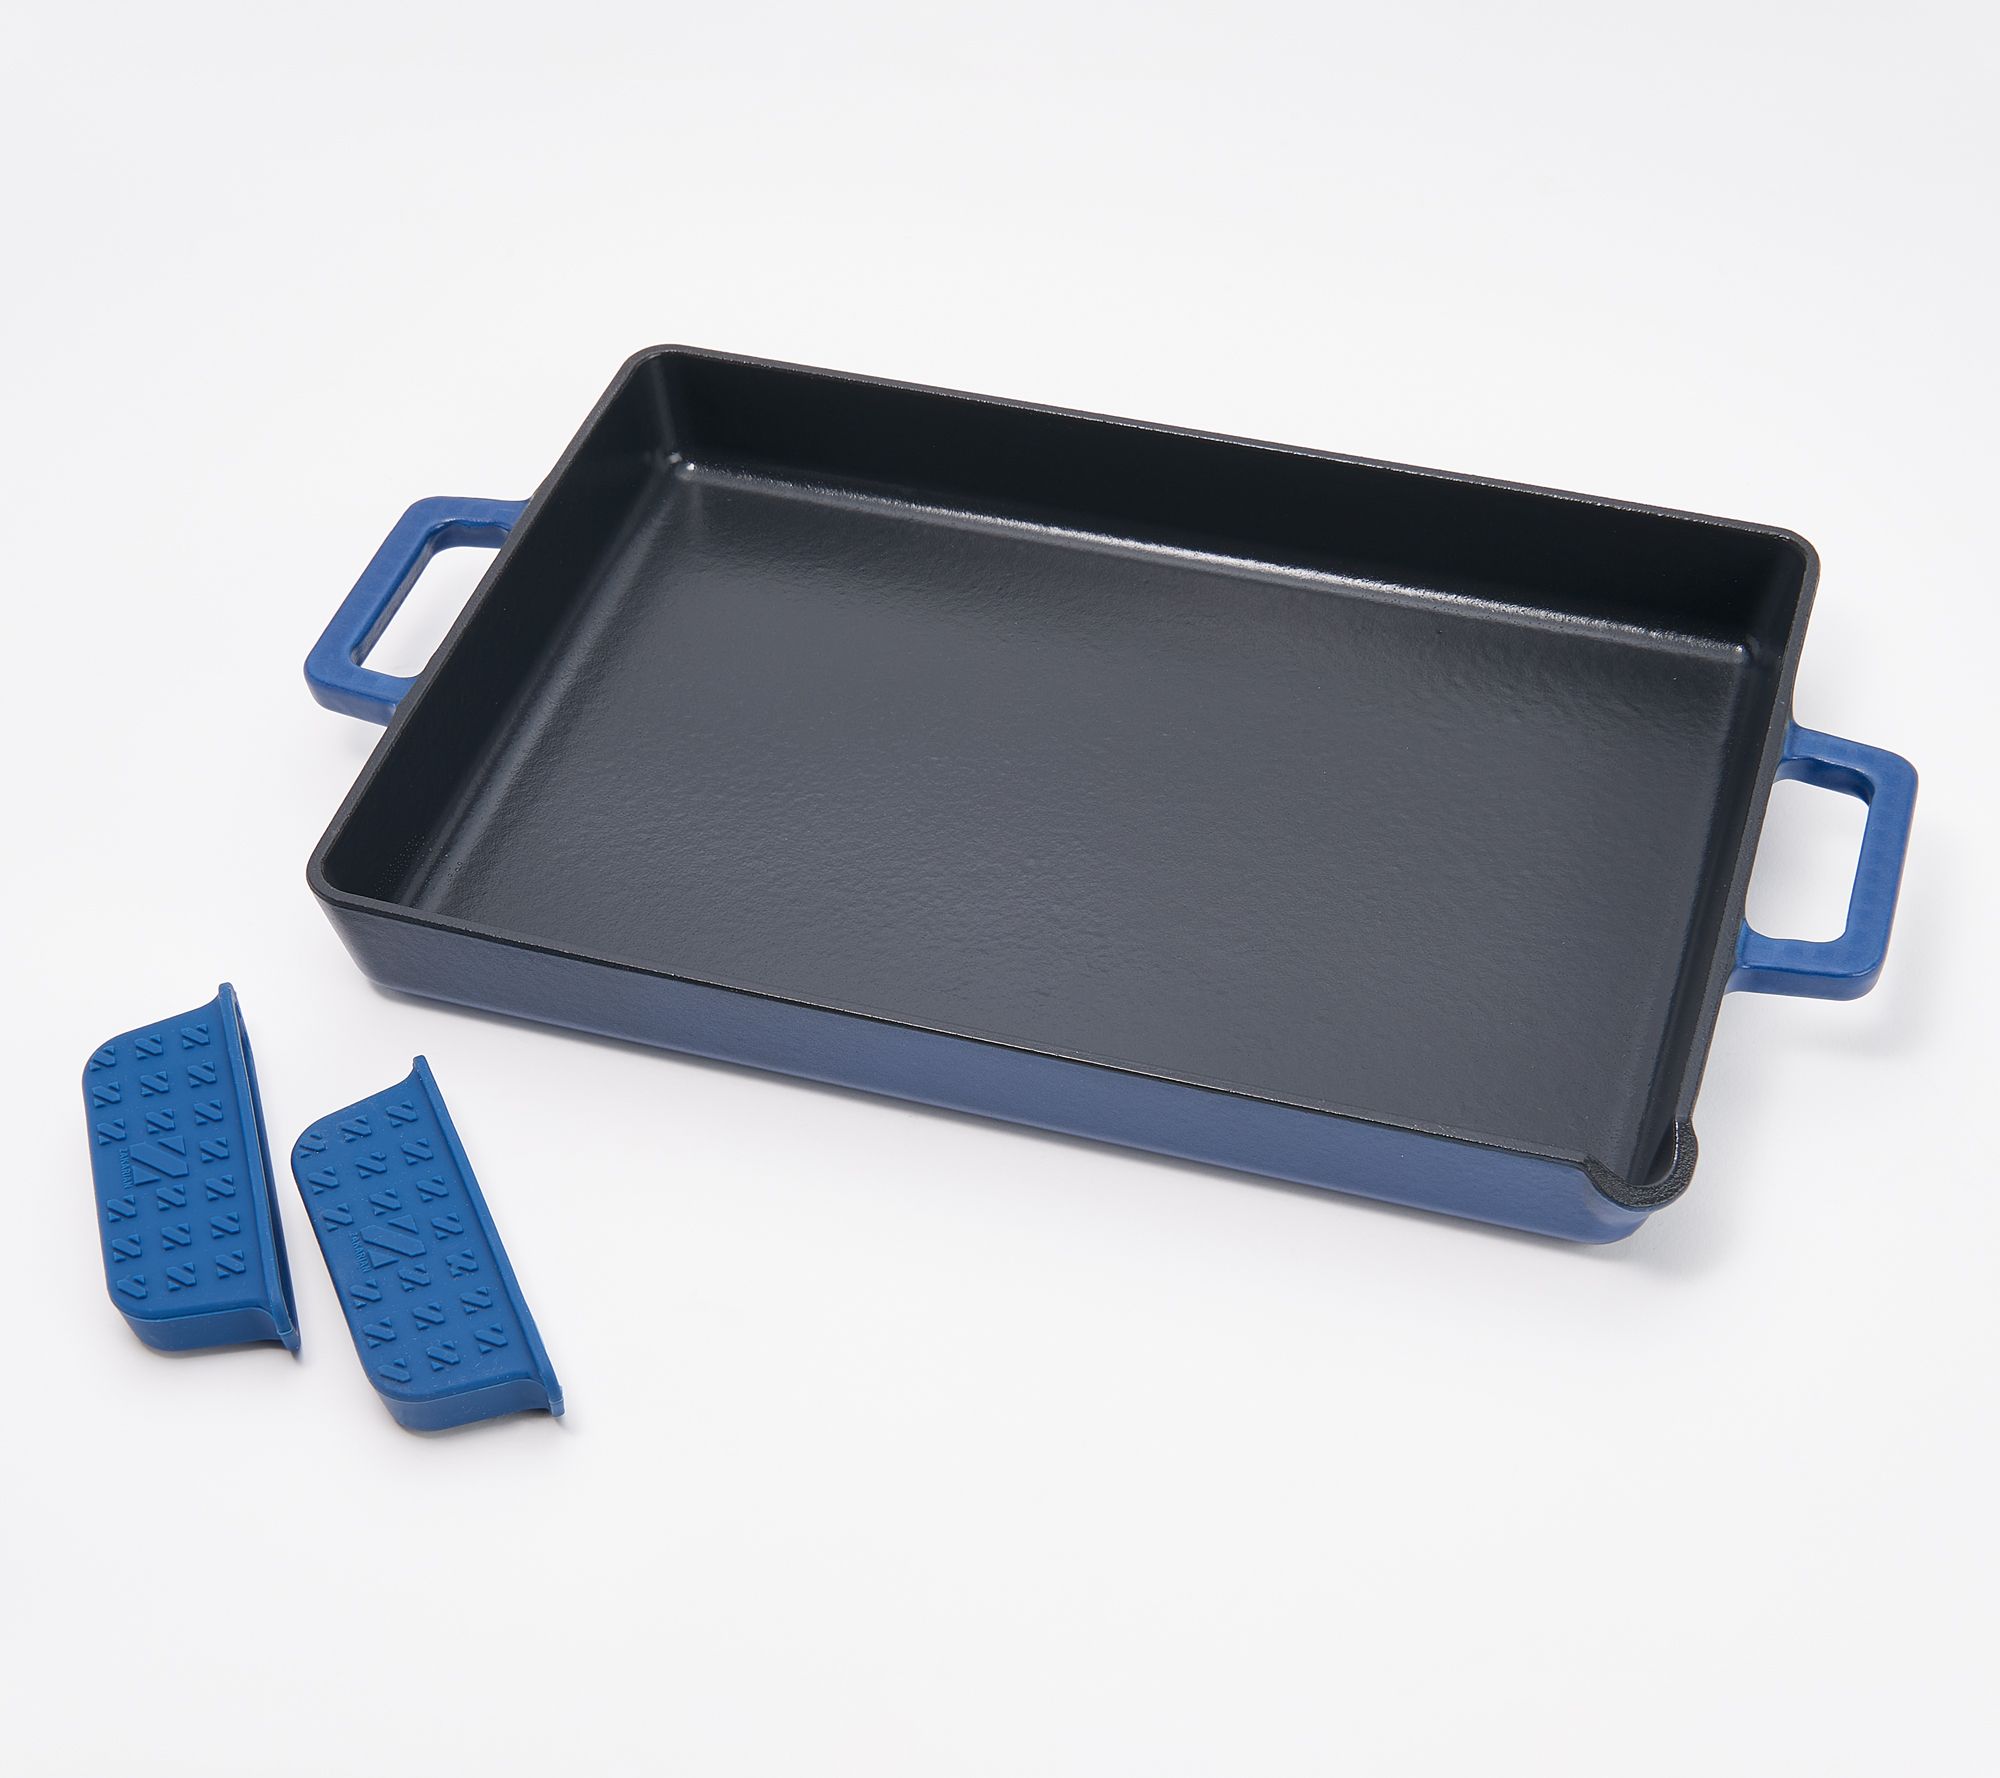 8 x 8 Cast Iron Baker with Griddle Cover — Shop Geoffrey Zakarian